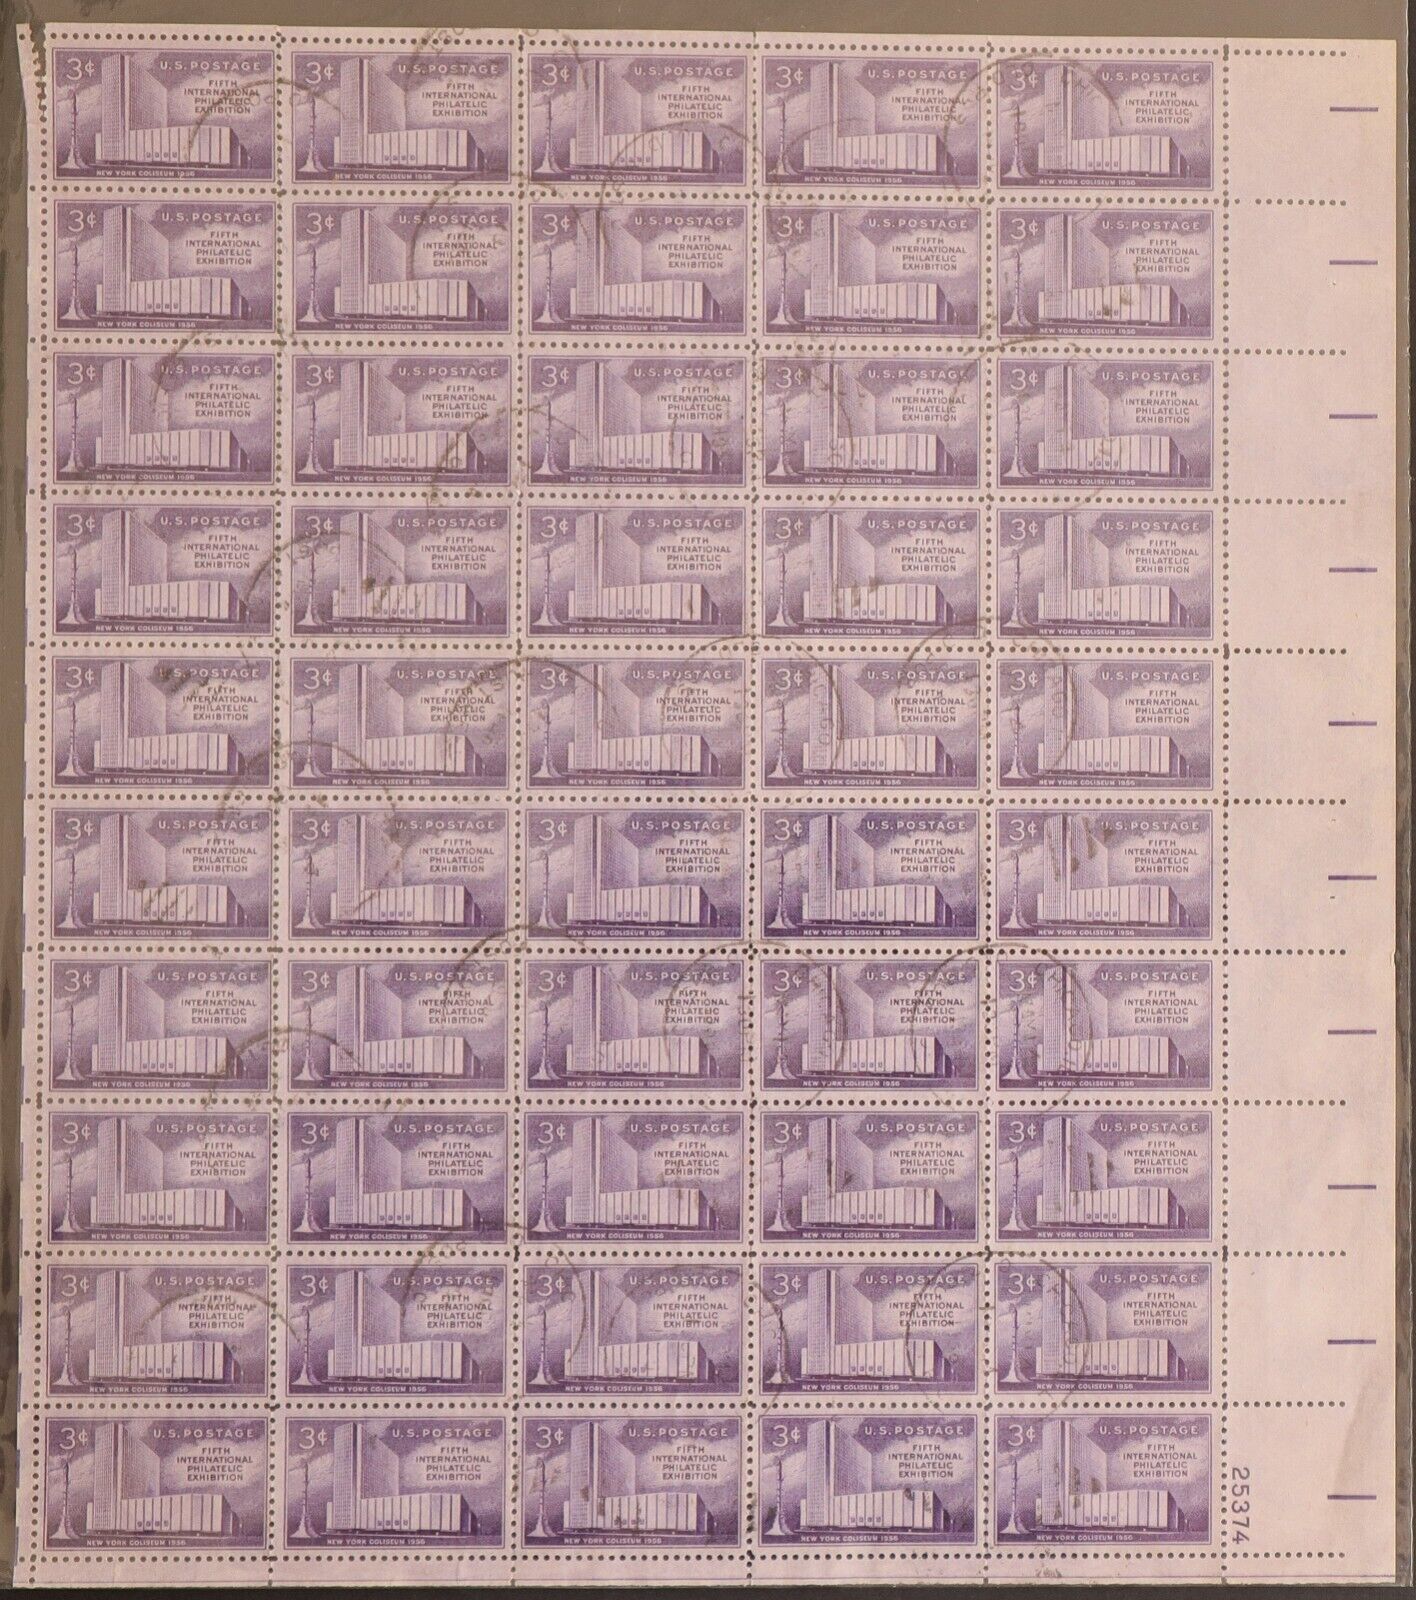 U.S. Used #1076 3c Fipex. Sheet of 50. Oval Cancel. Choice!